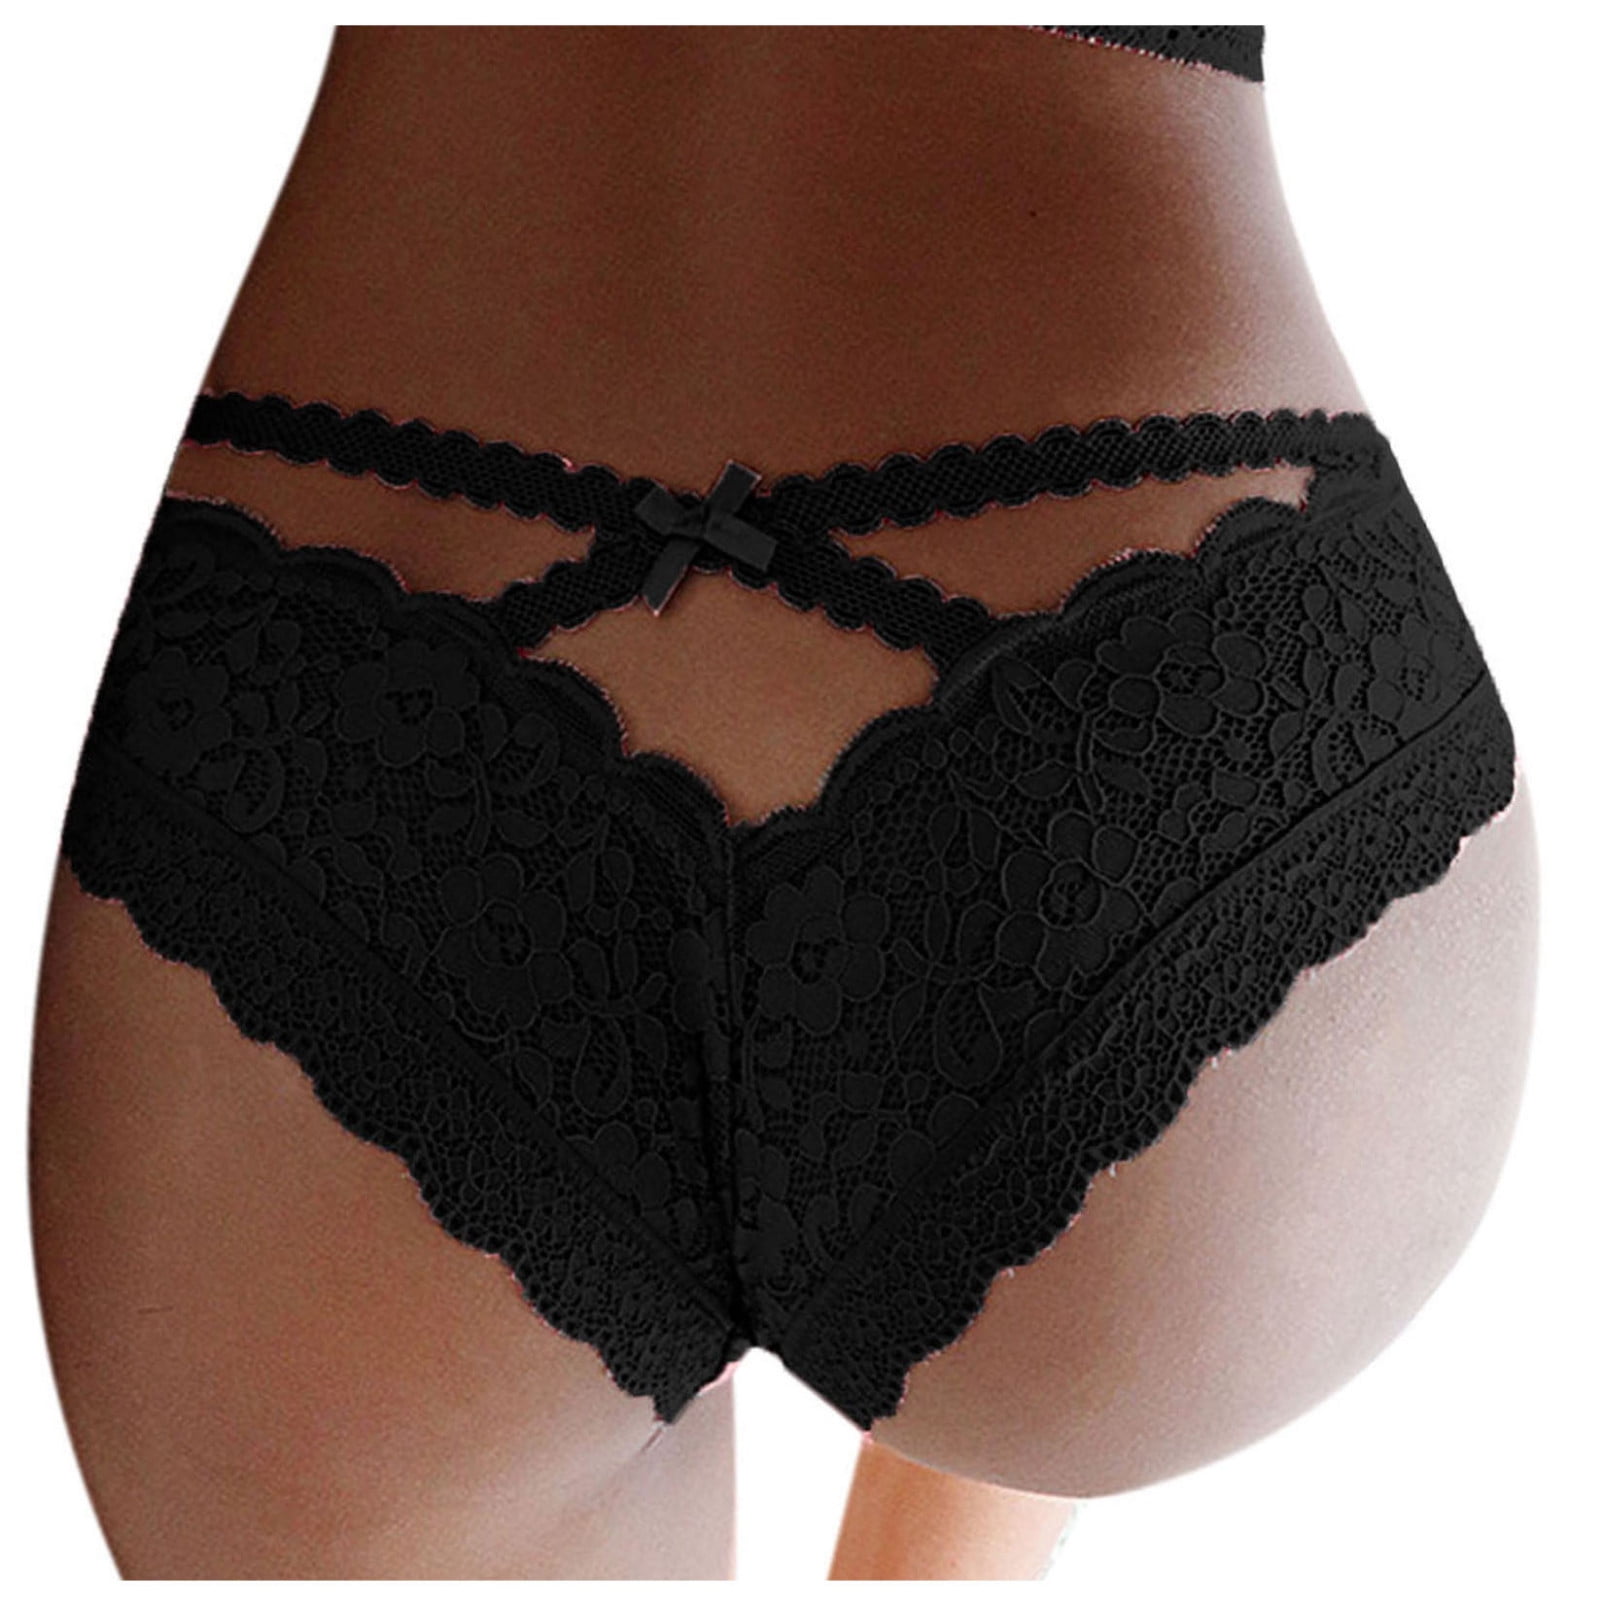 Details about  / Sexy Women Lace Panties Briefs Knickers Thongs Lingerie Sheer G-string Underwear